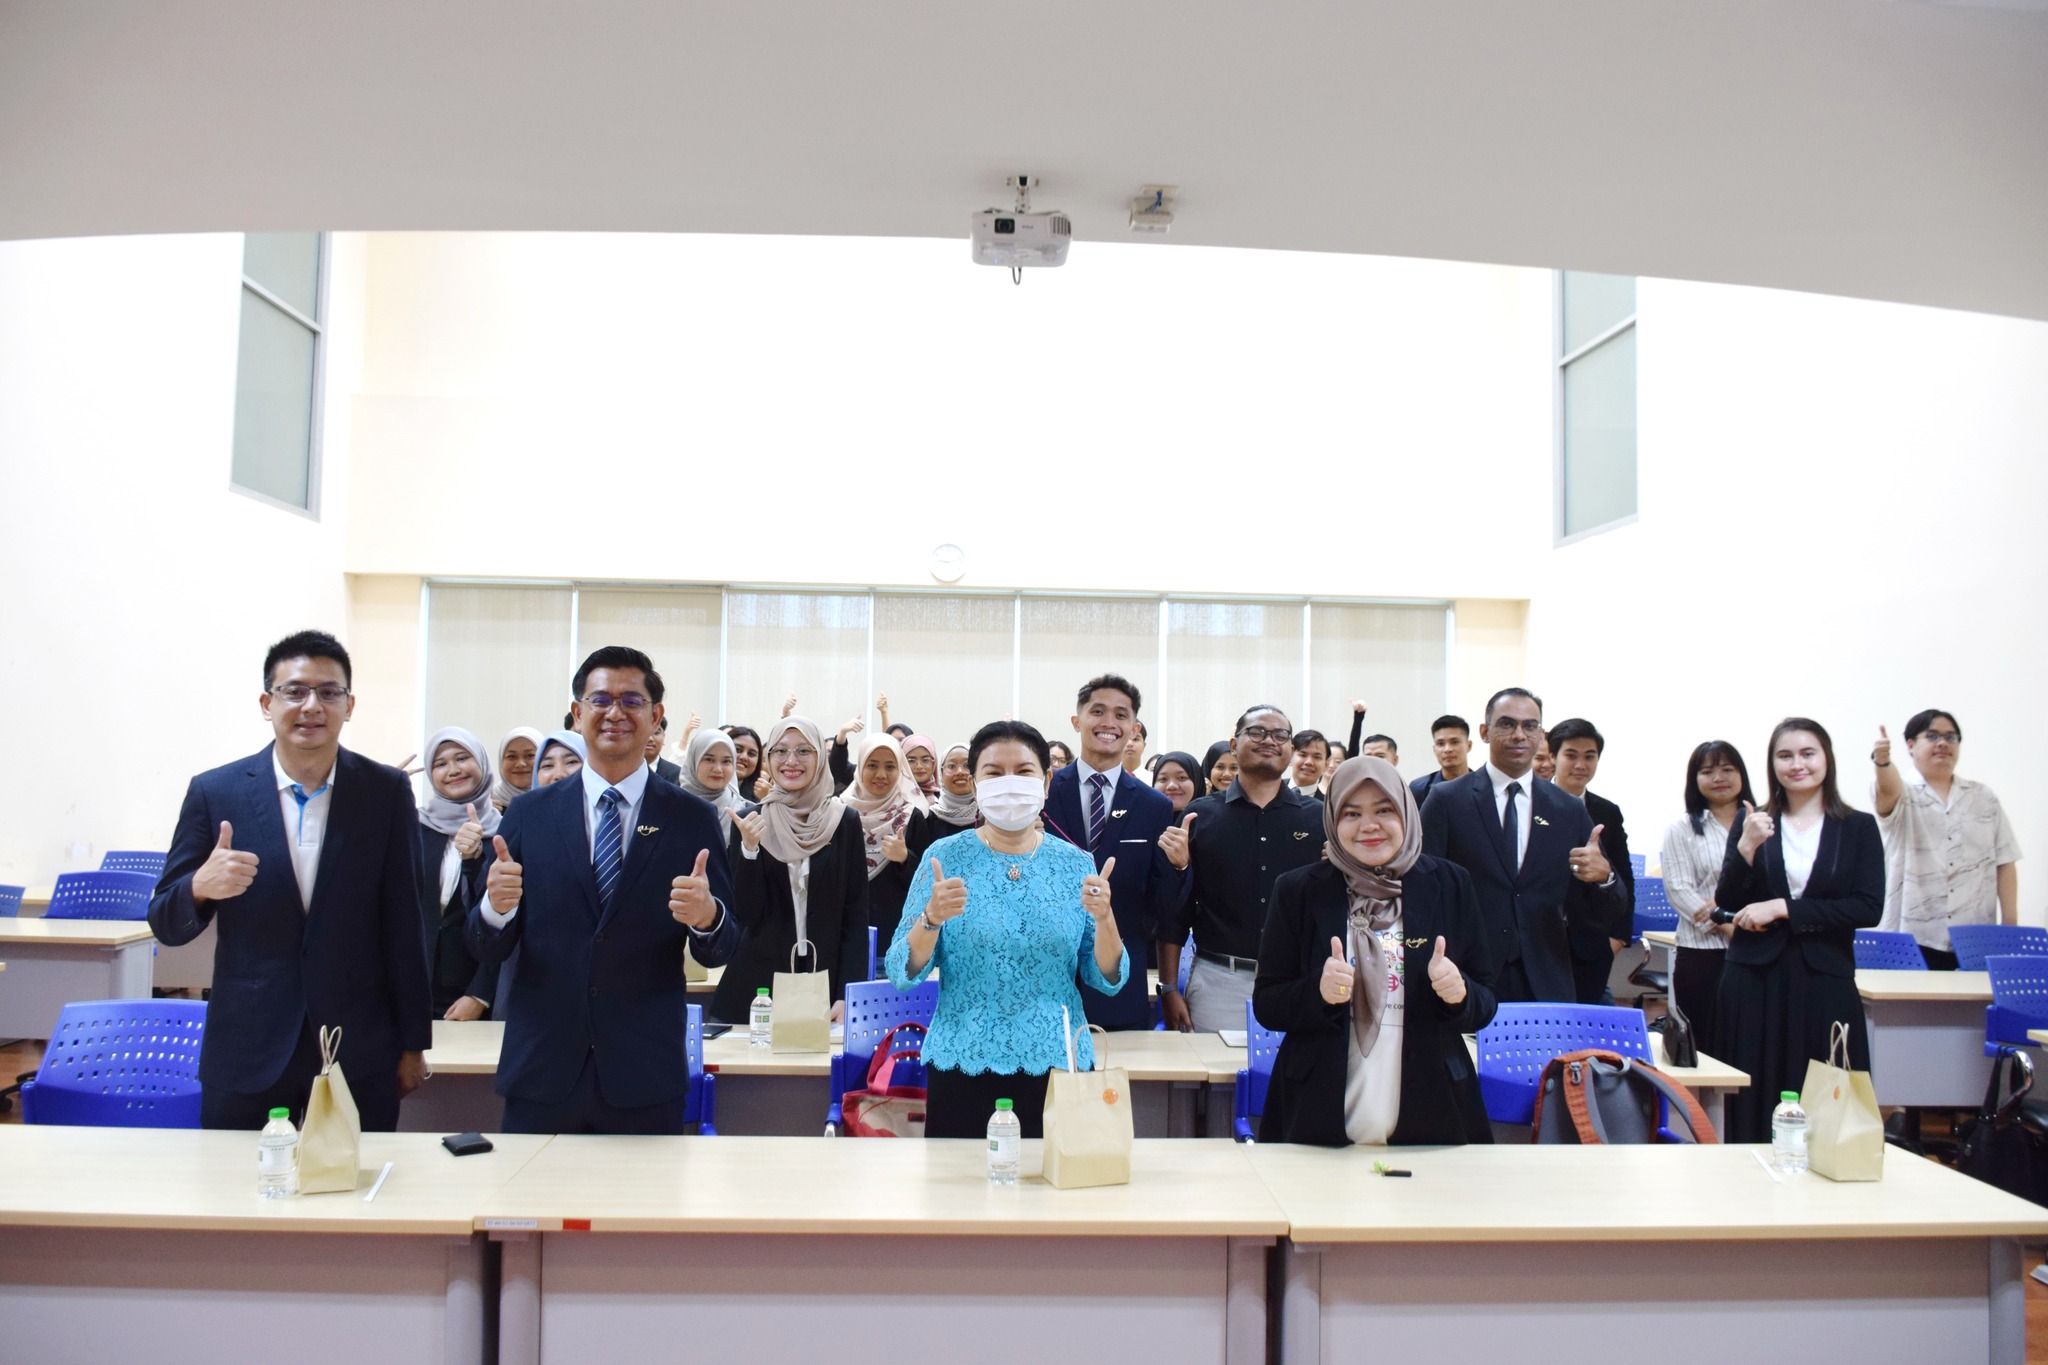 The Graduate School of Public Administration (GSPA NIDA) welcomed faculty and students from Universiti Teknologi MARA (UiTM) Malaysia, UiTM-GSPA,NIDA Global Community Outreach 2023